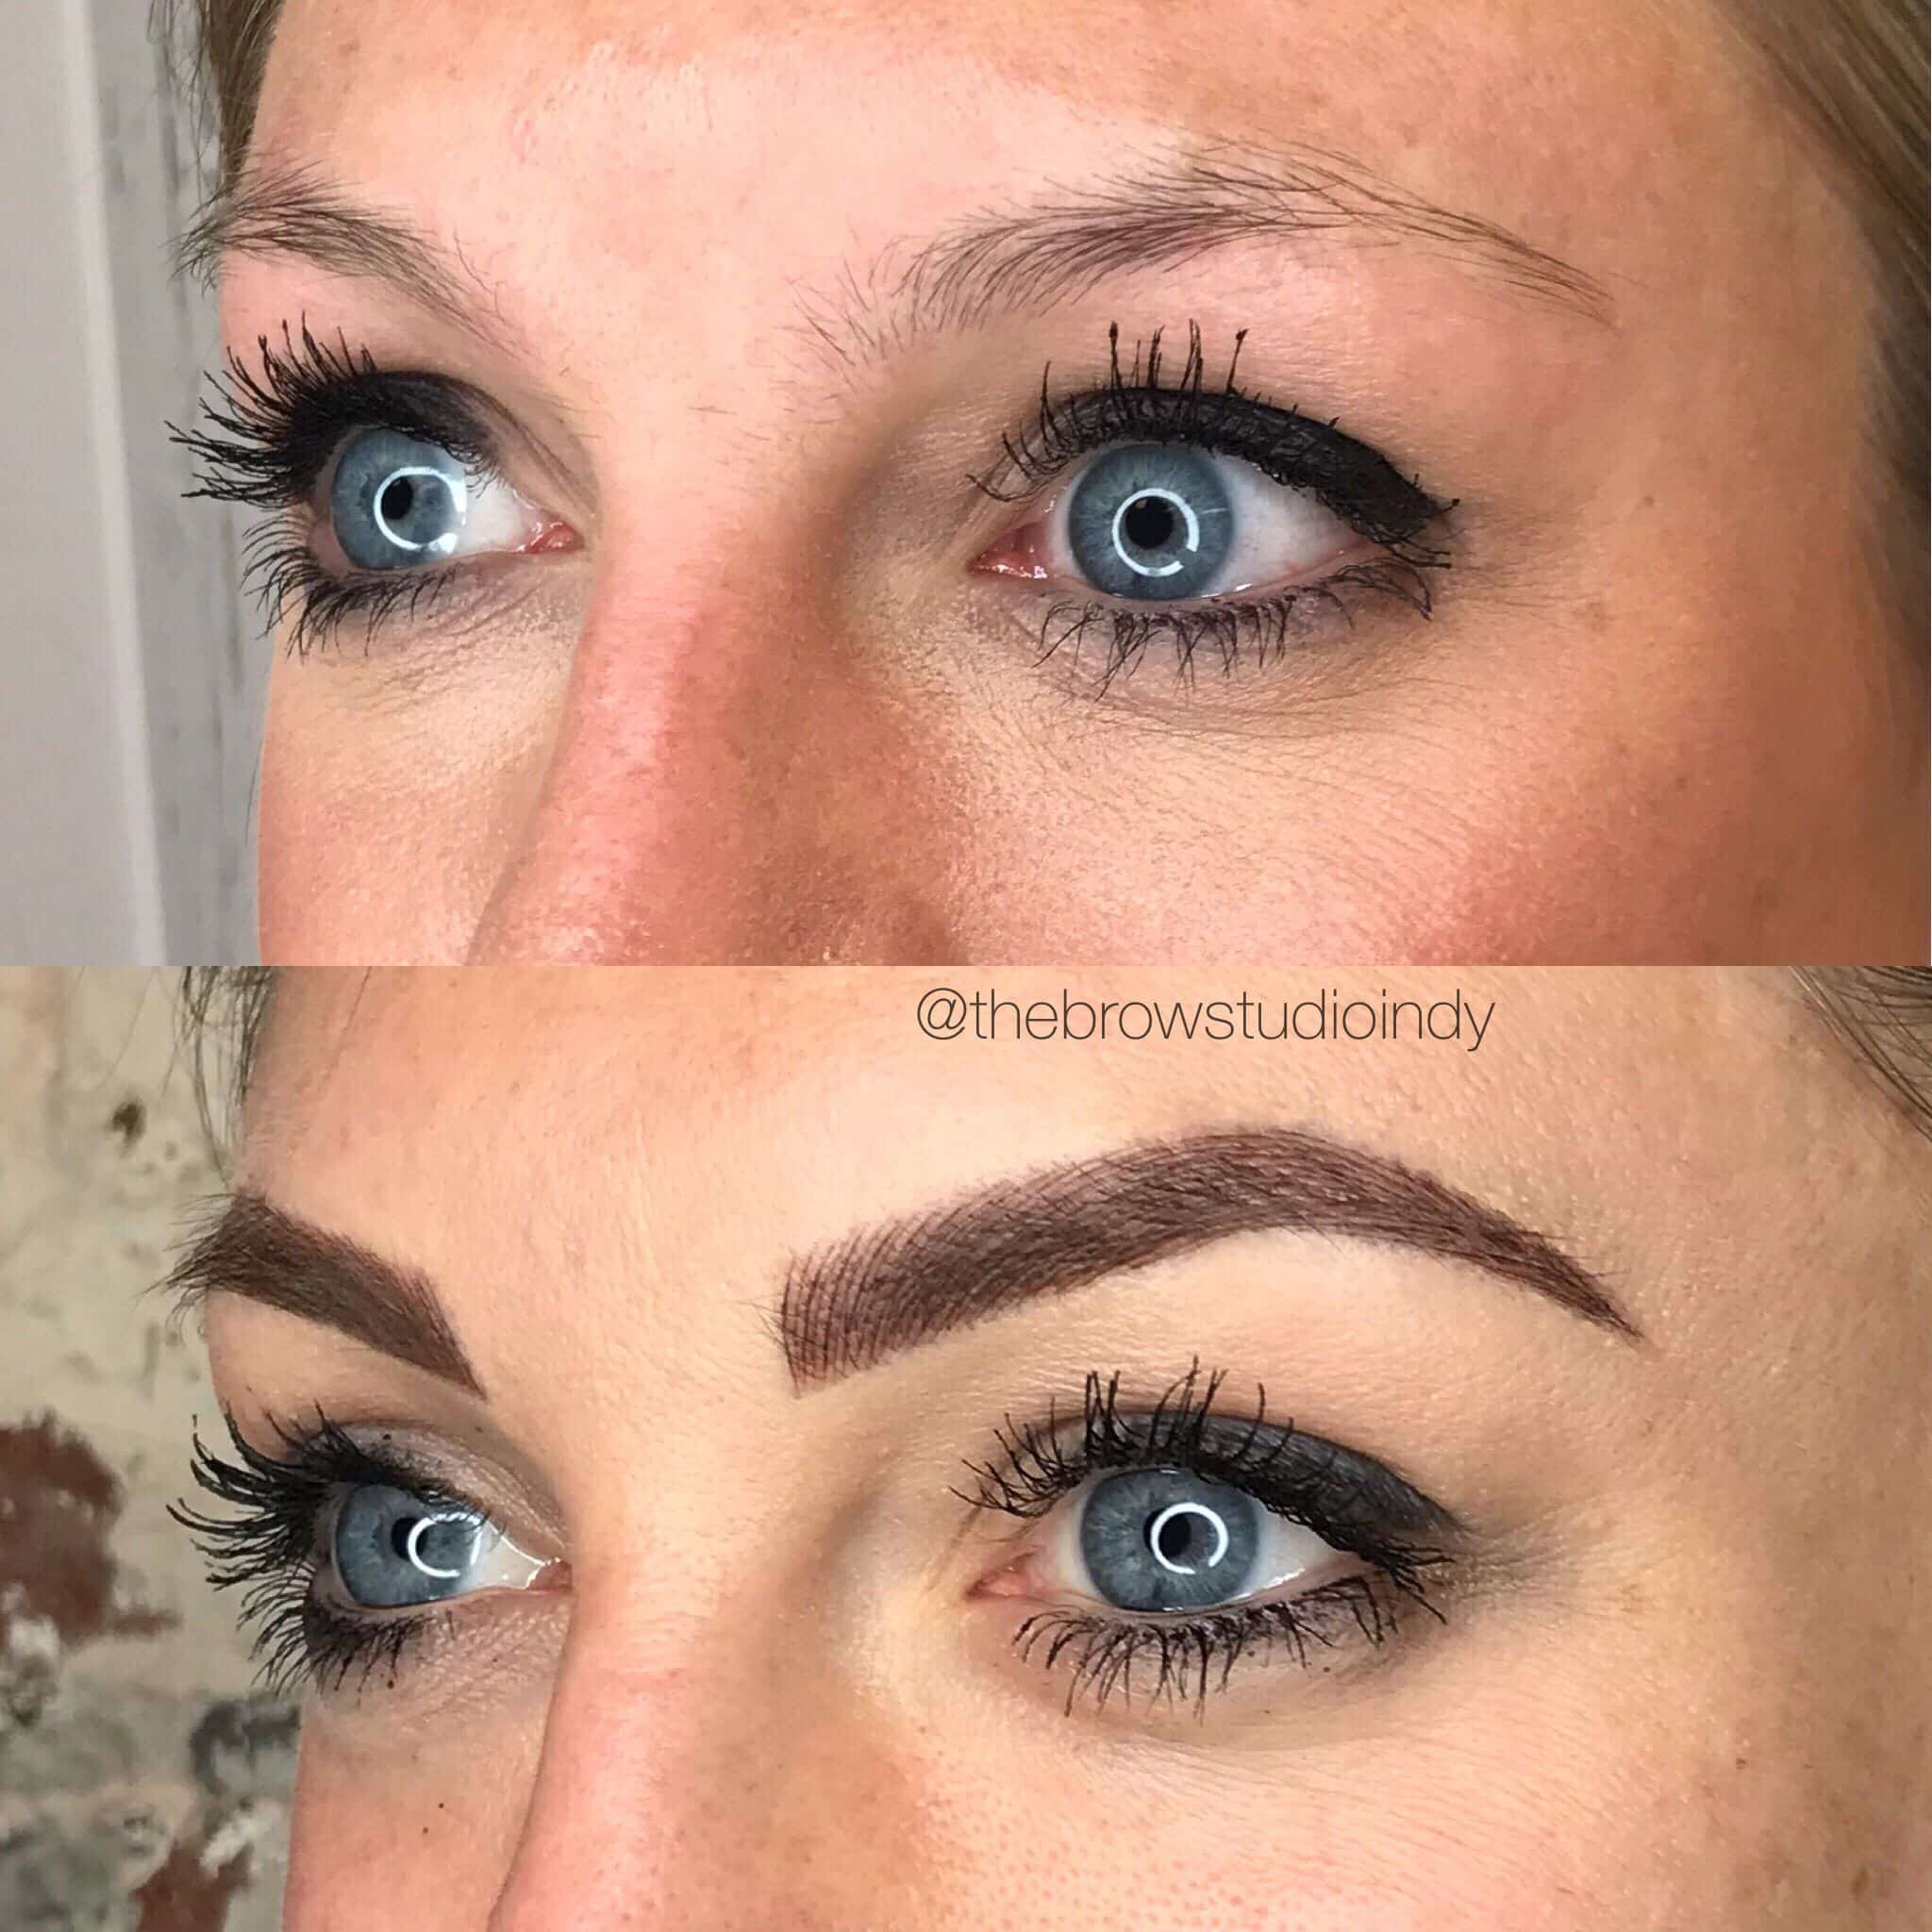 Eyebrow Tattooing Before And After : 3 YEARS AFTER MICROBLADING!